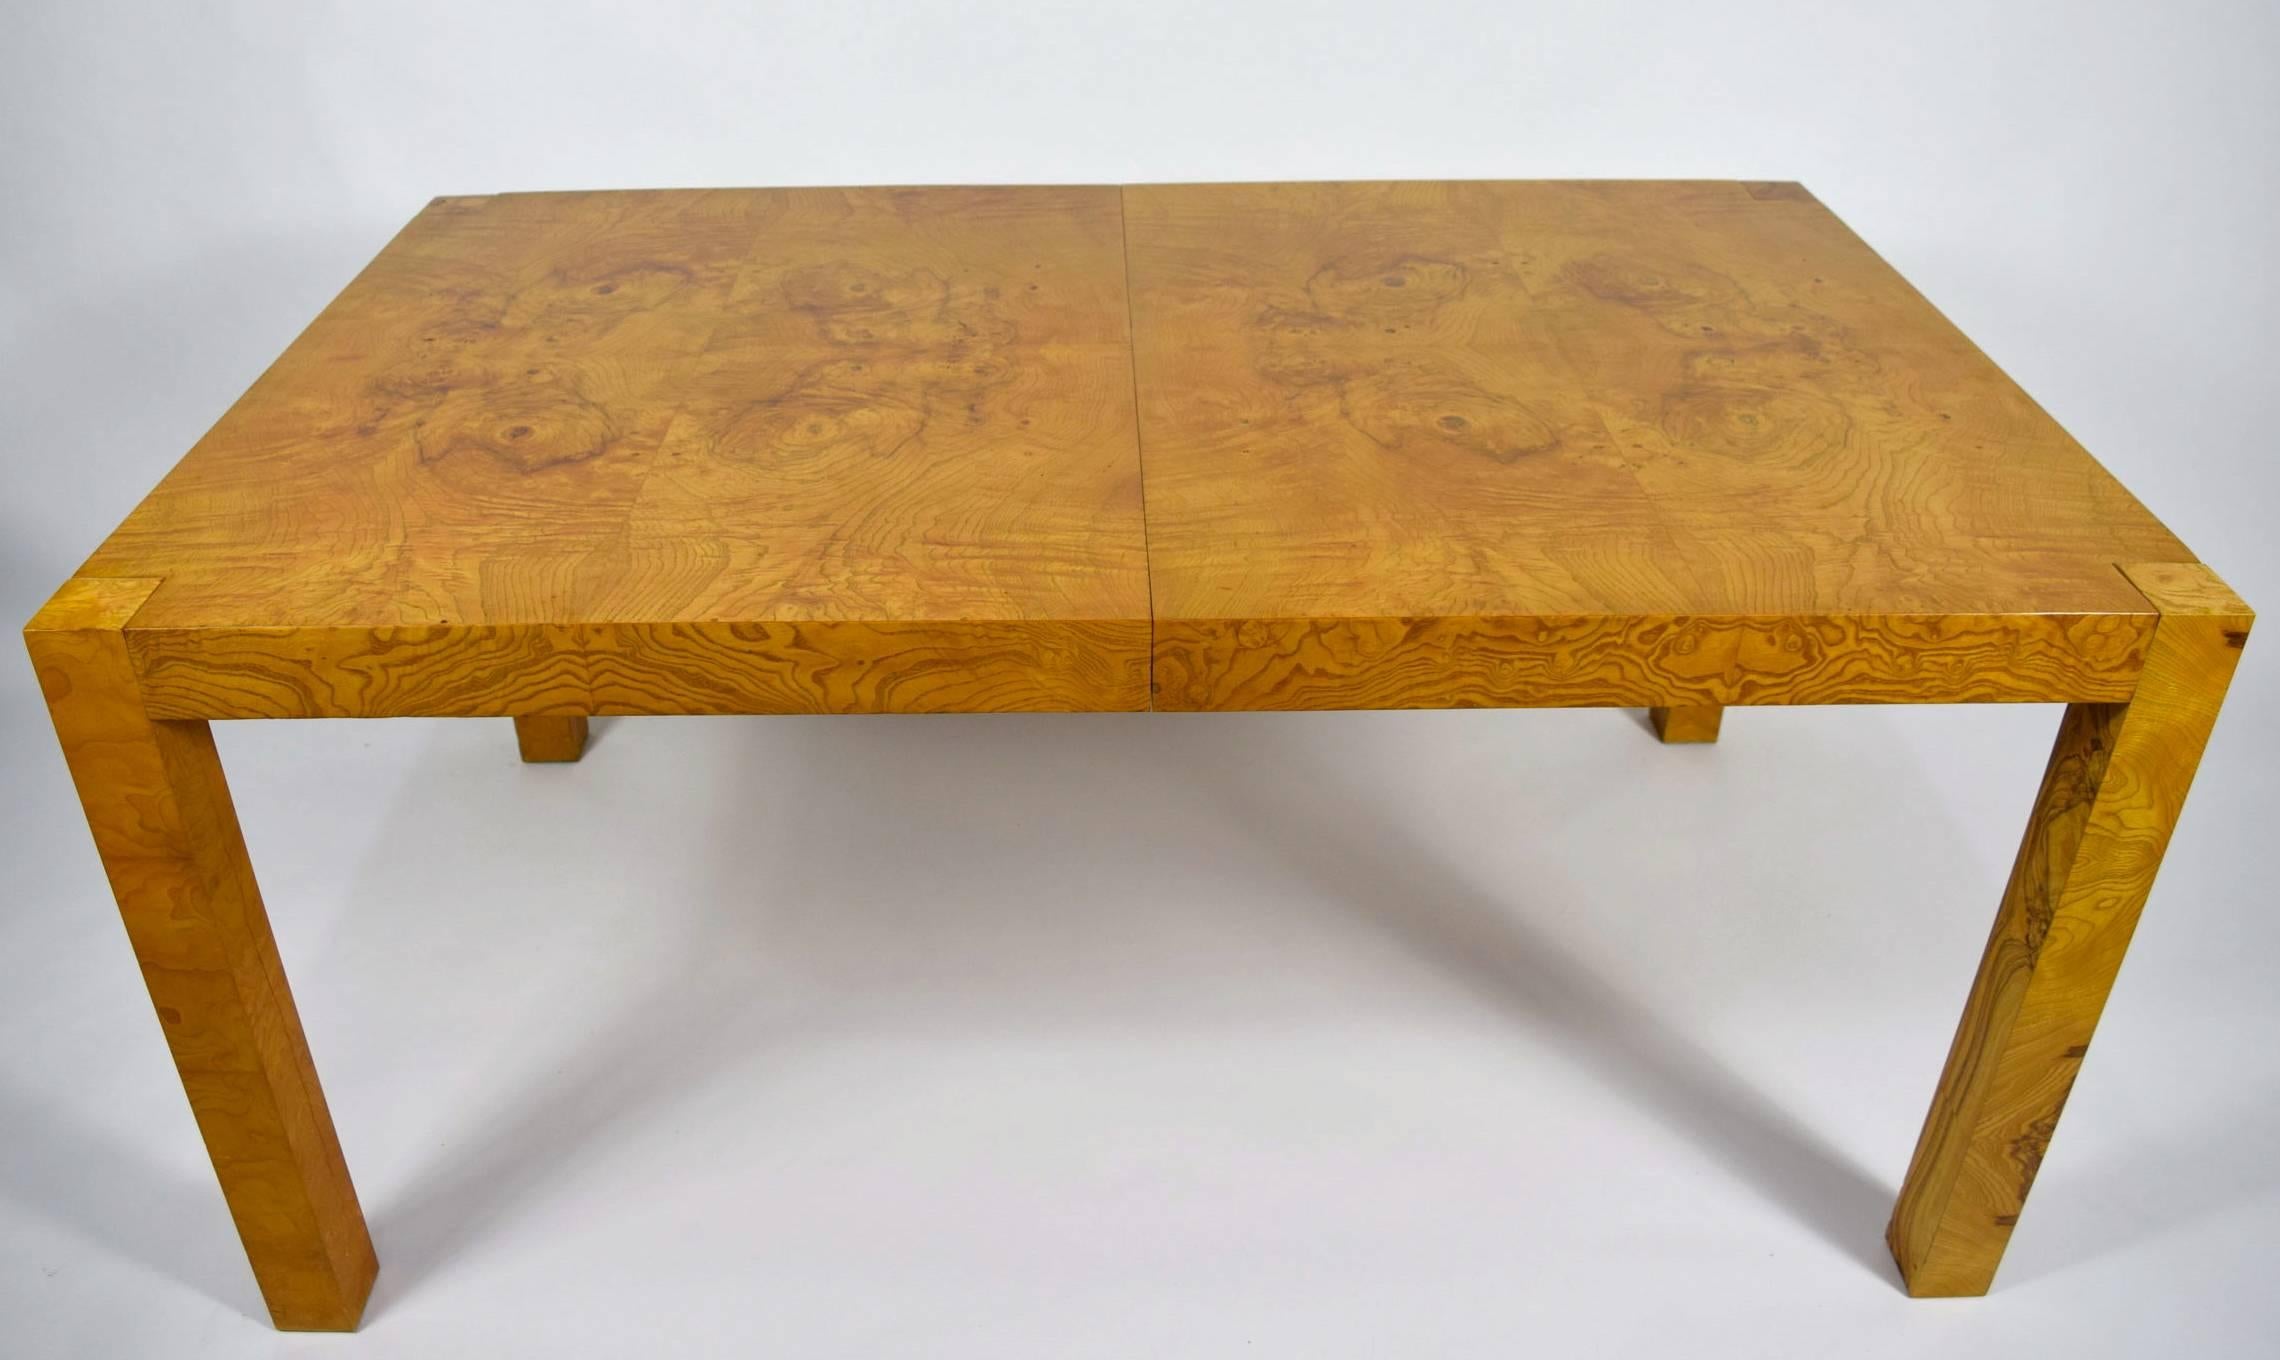 Olive ash burl dining table by Milo Baughman for Lane. Table has two 18